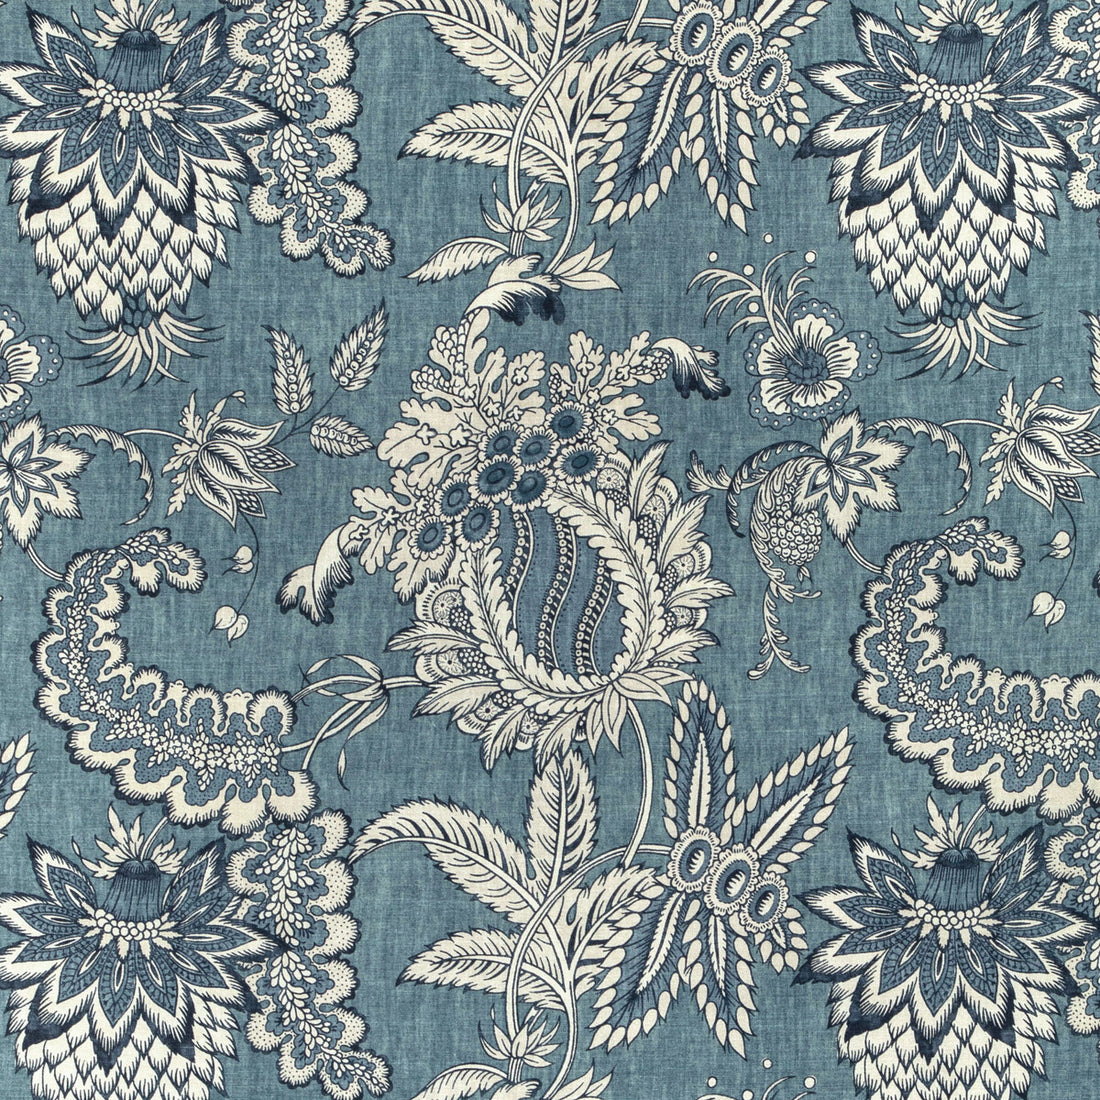 Jennings Print fabric in blue color - pattern 2022115.5.0 - by Lee Jofa in the Bunny Williams Arcadia collection